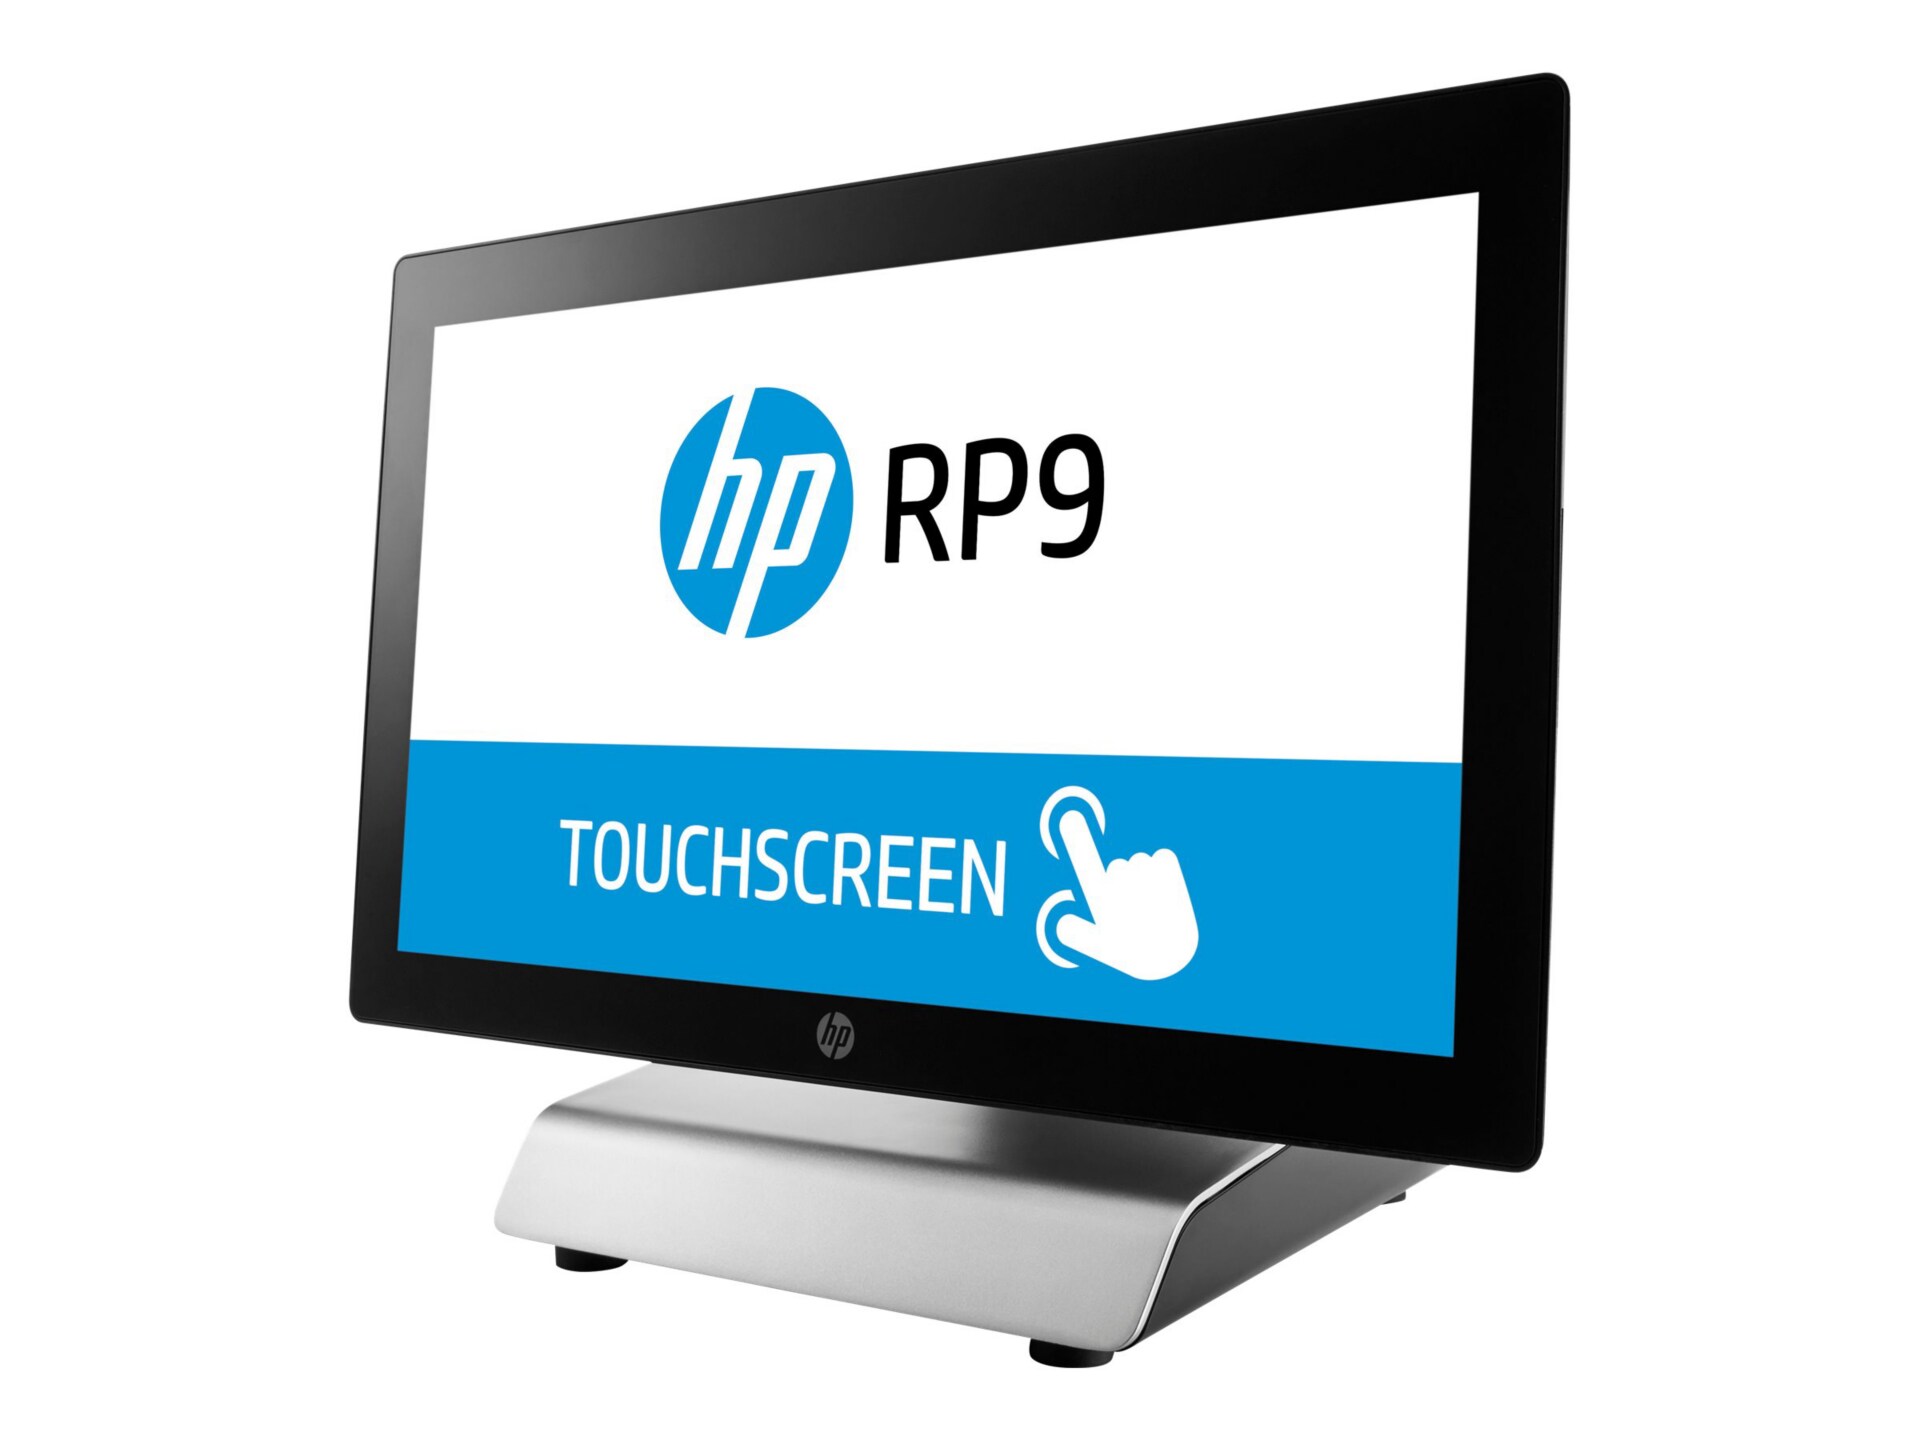 HP RP9 G1 Retail System 9015 - all-in-one - Core i7 6700 3.4 GHz - vPro - 8